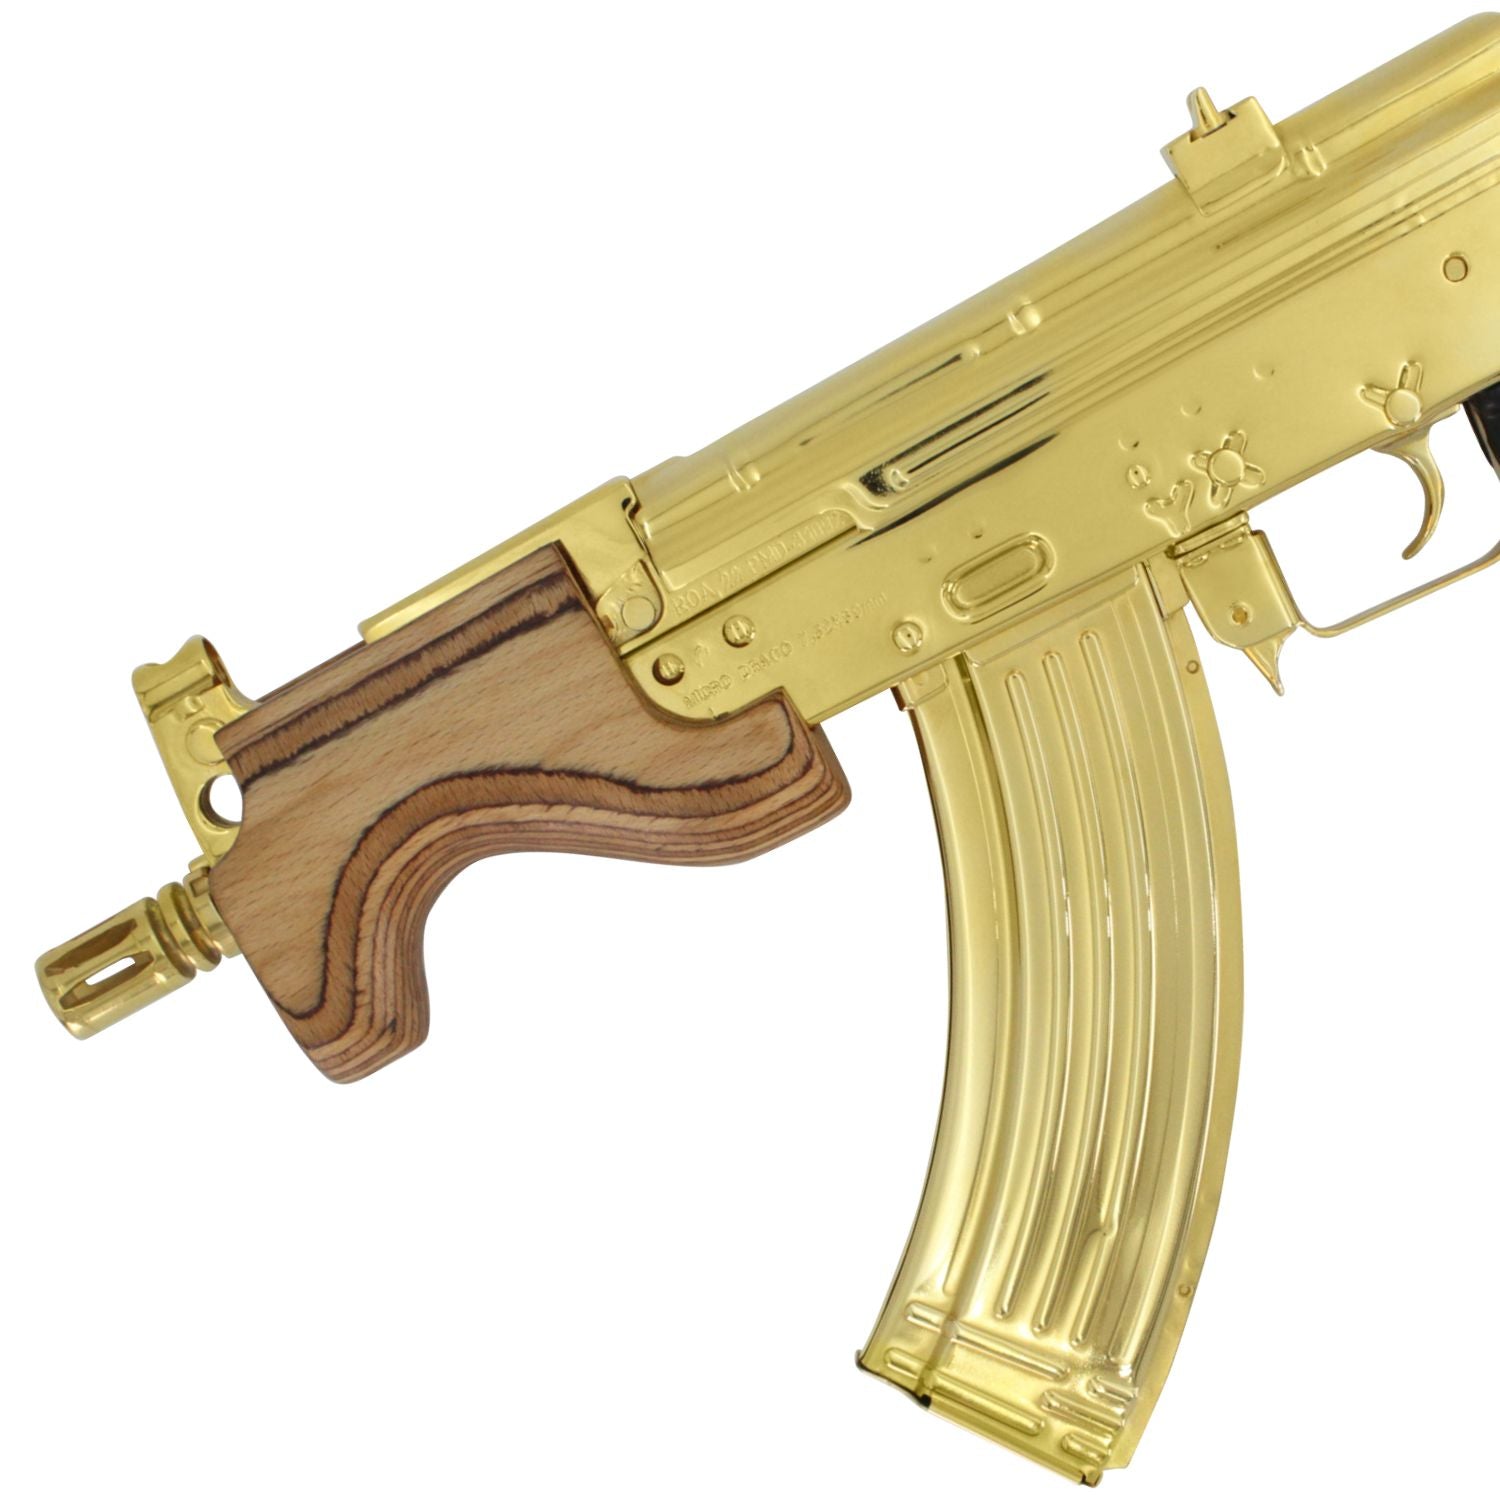 Century Arms Micro Draco, 7.62 X 39mm, 24k Gold Plated With 24k Gold Plated Magazine, SKU: 6781534470246